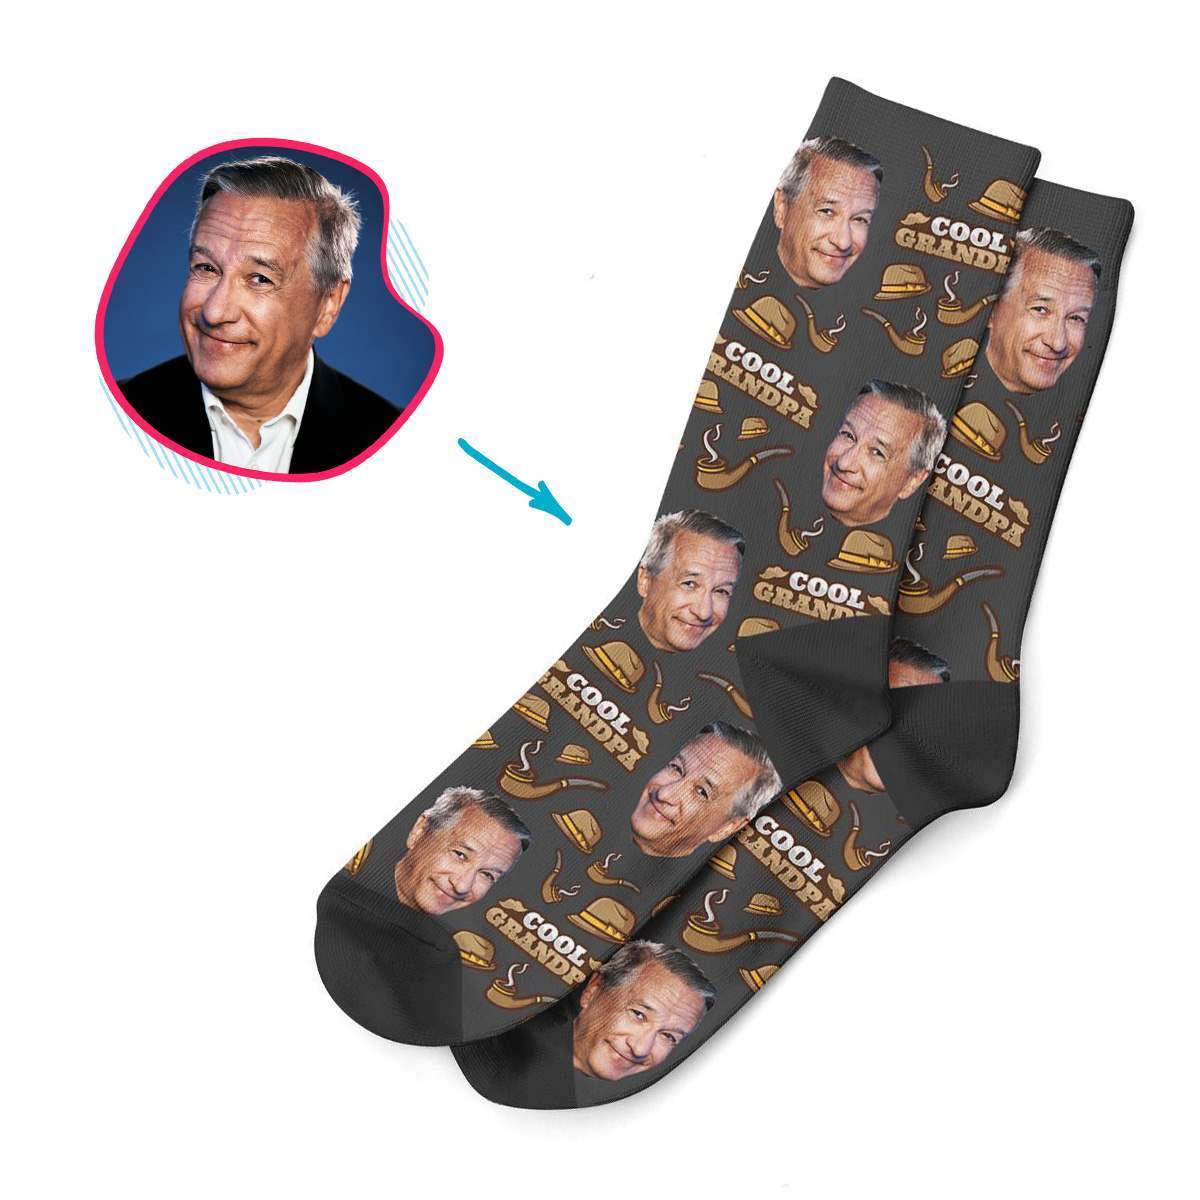 dark Cool Grandfather socks personalized with photo of face printed on them